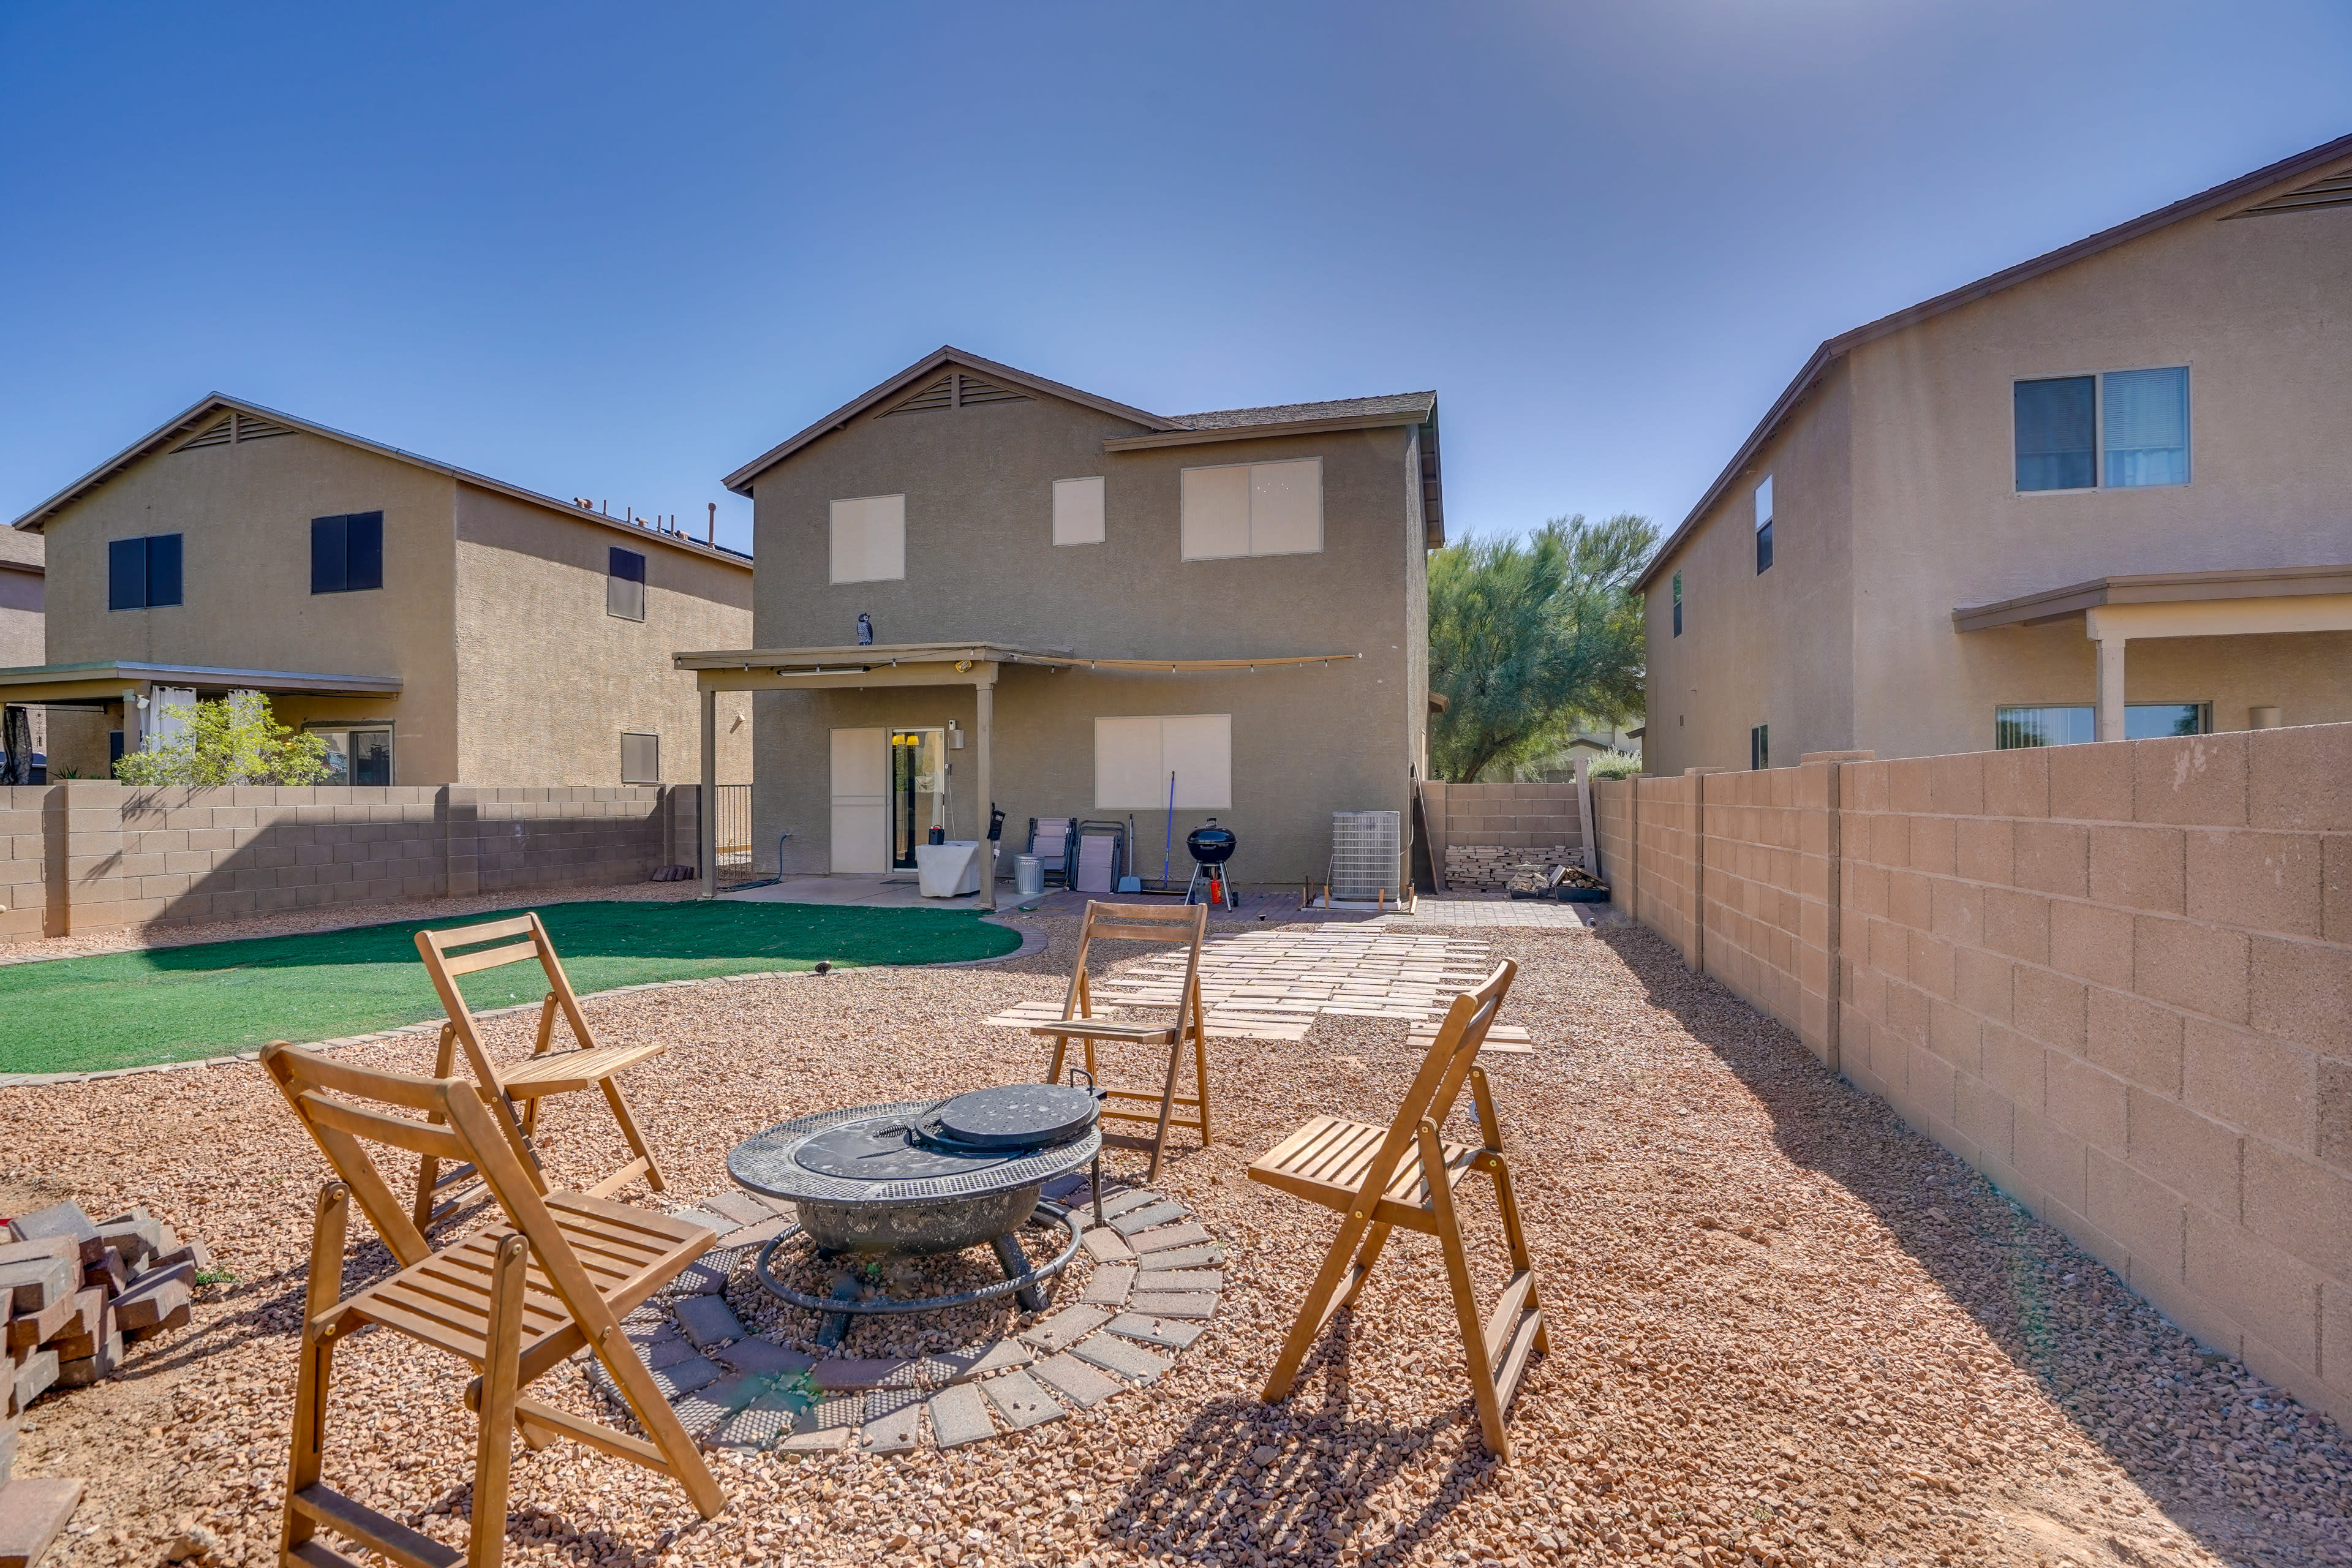 Tucson Vacation Rental | 4BR | 2.5BA | 1,599 Sq Ft | Step-Free Entry